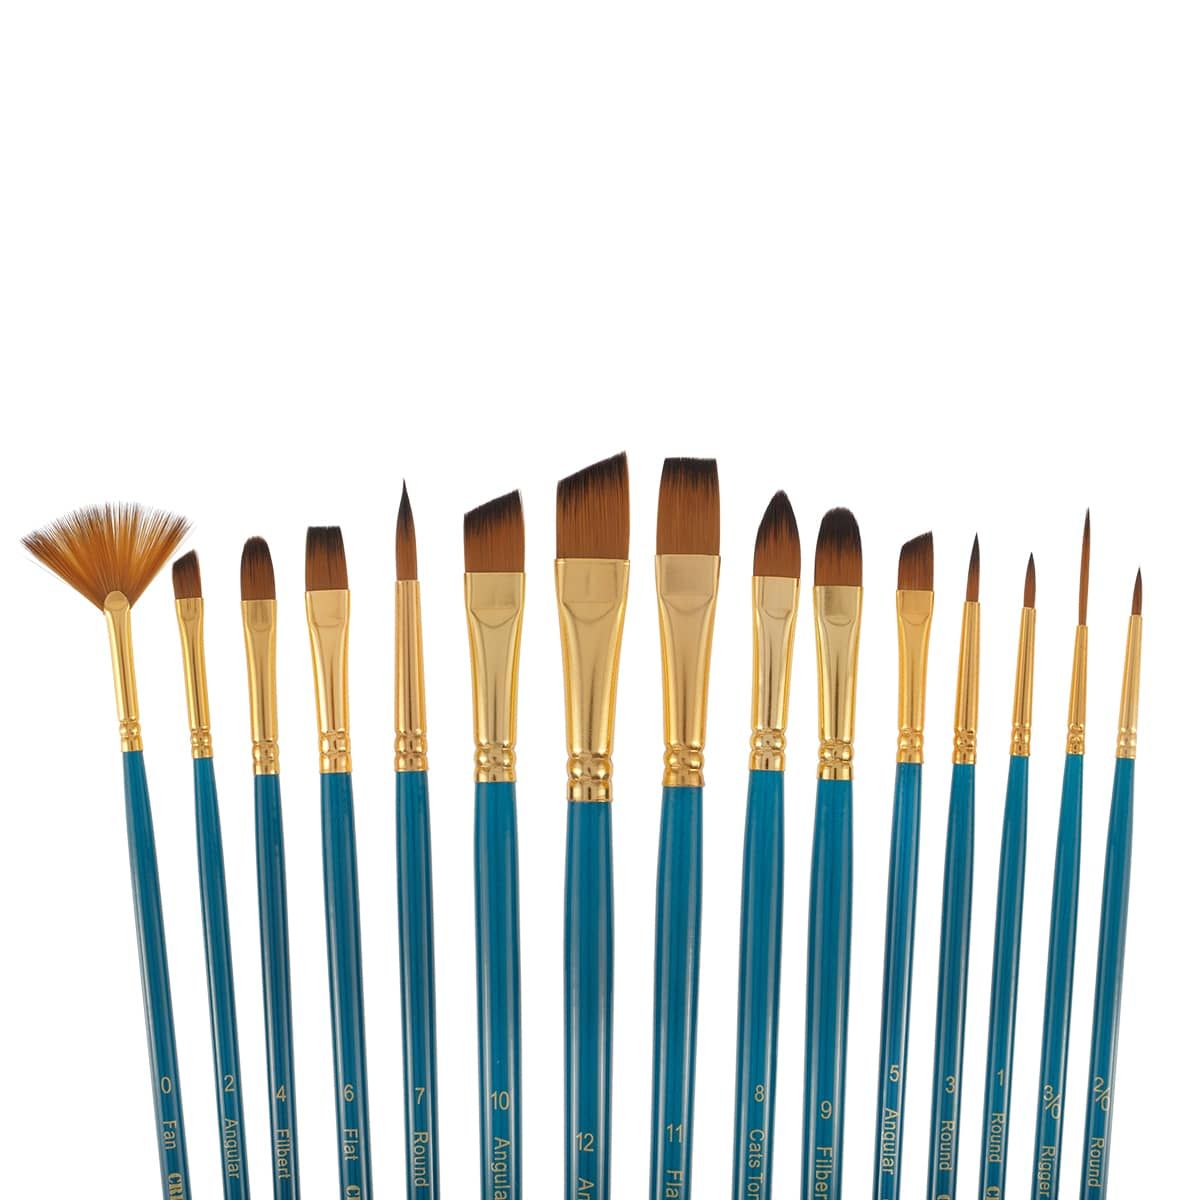 An assortment of 15 brushes for all types of media